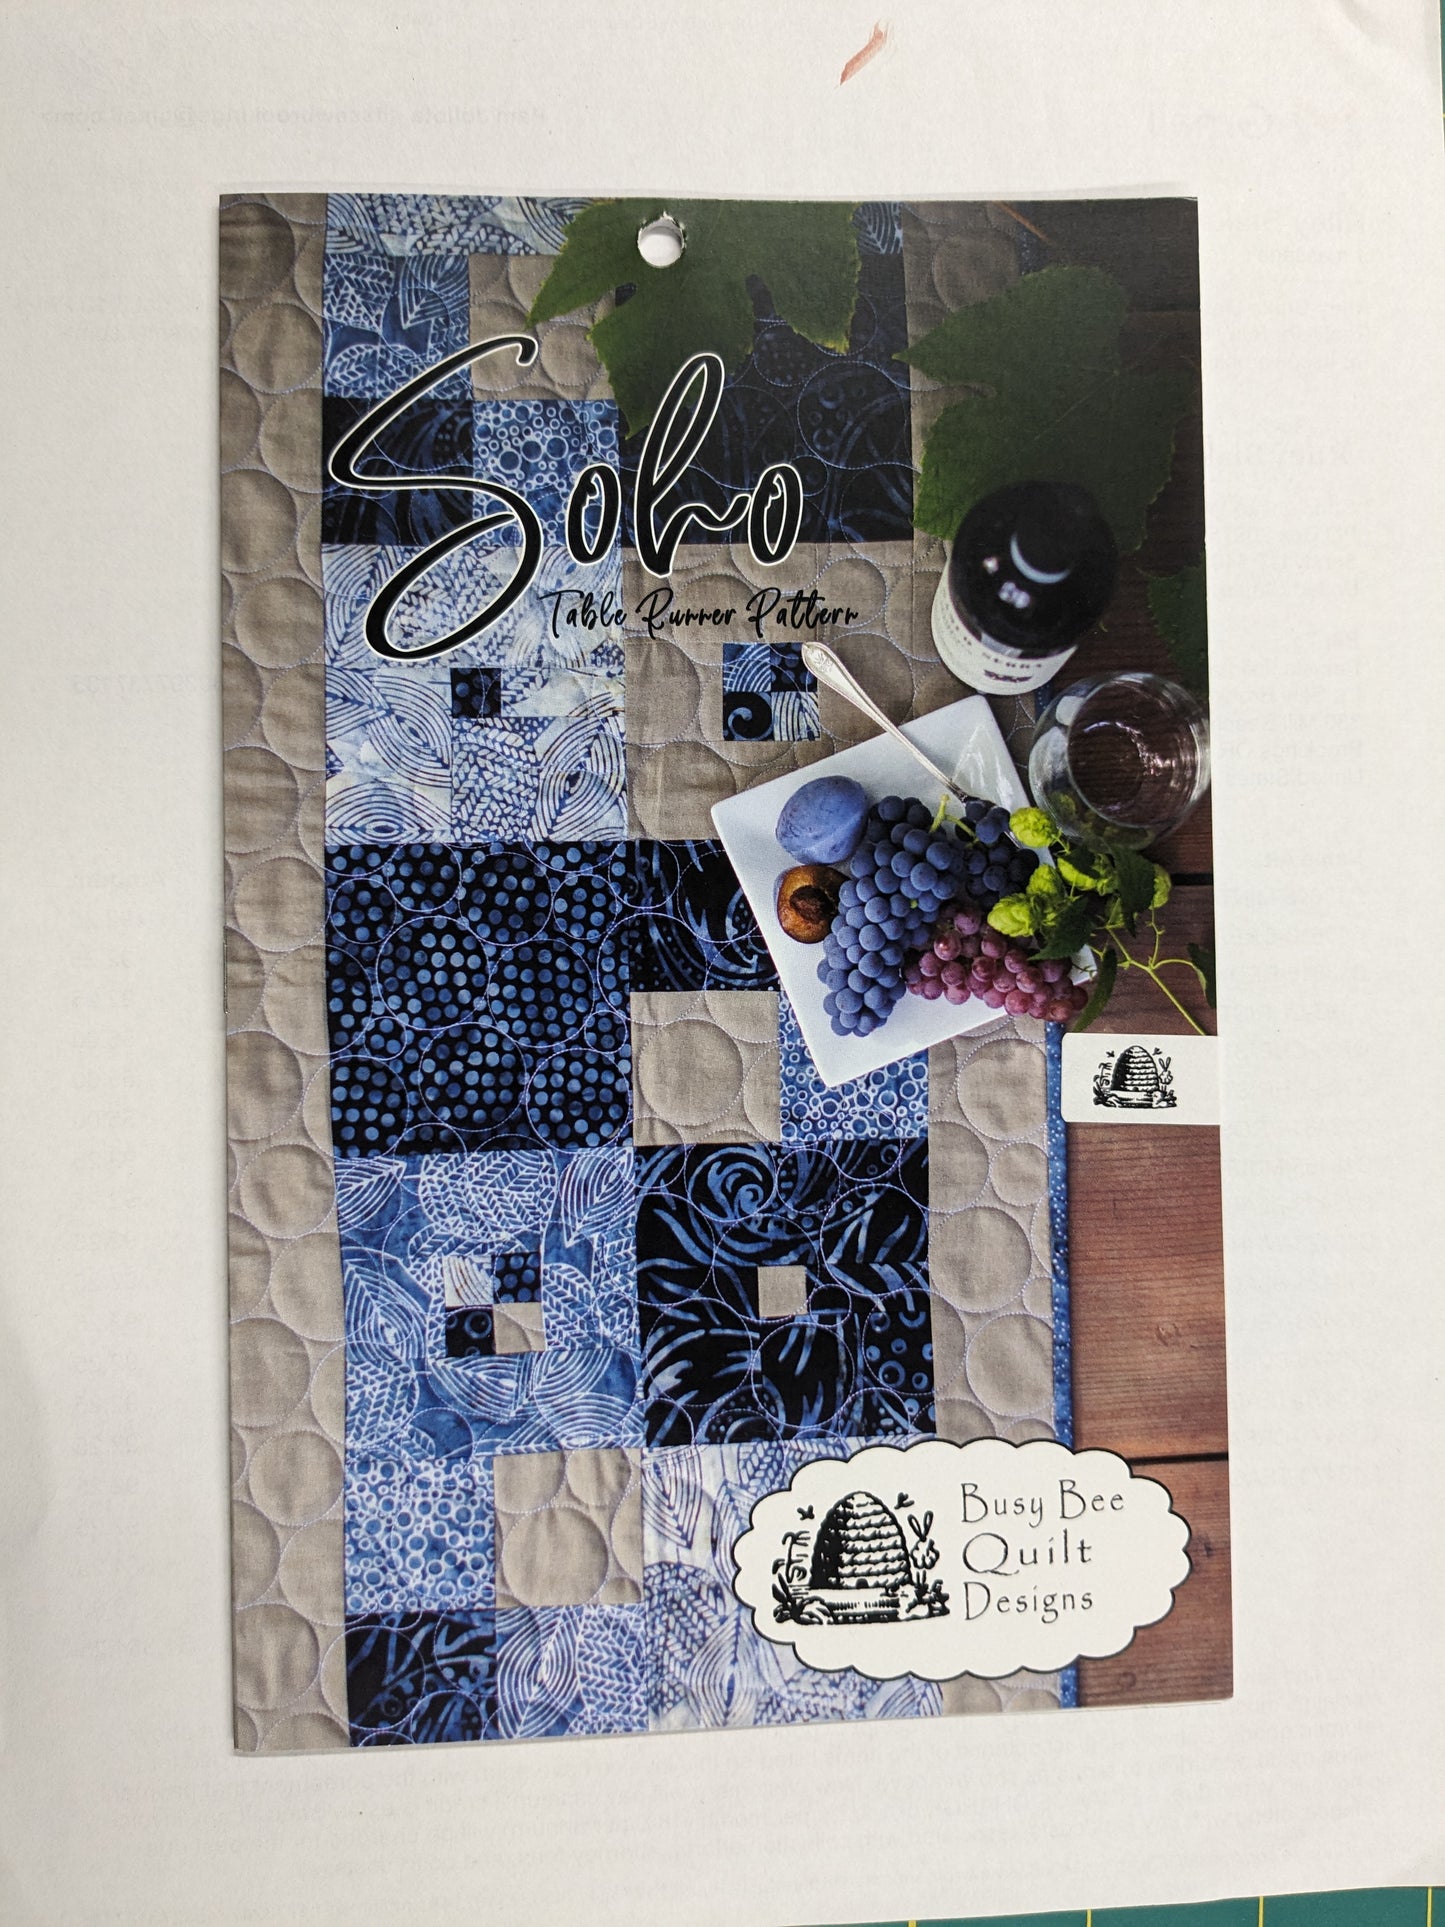 Busy Bee Quilt Designs - Soho Table Runner Pattern